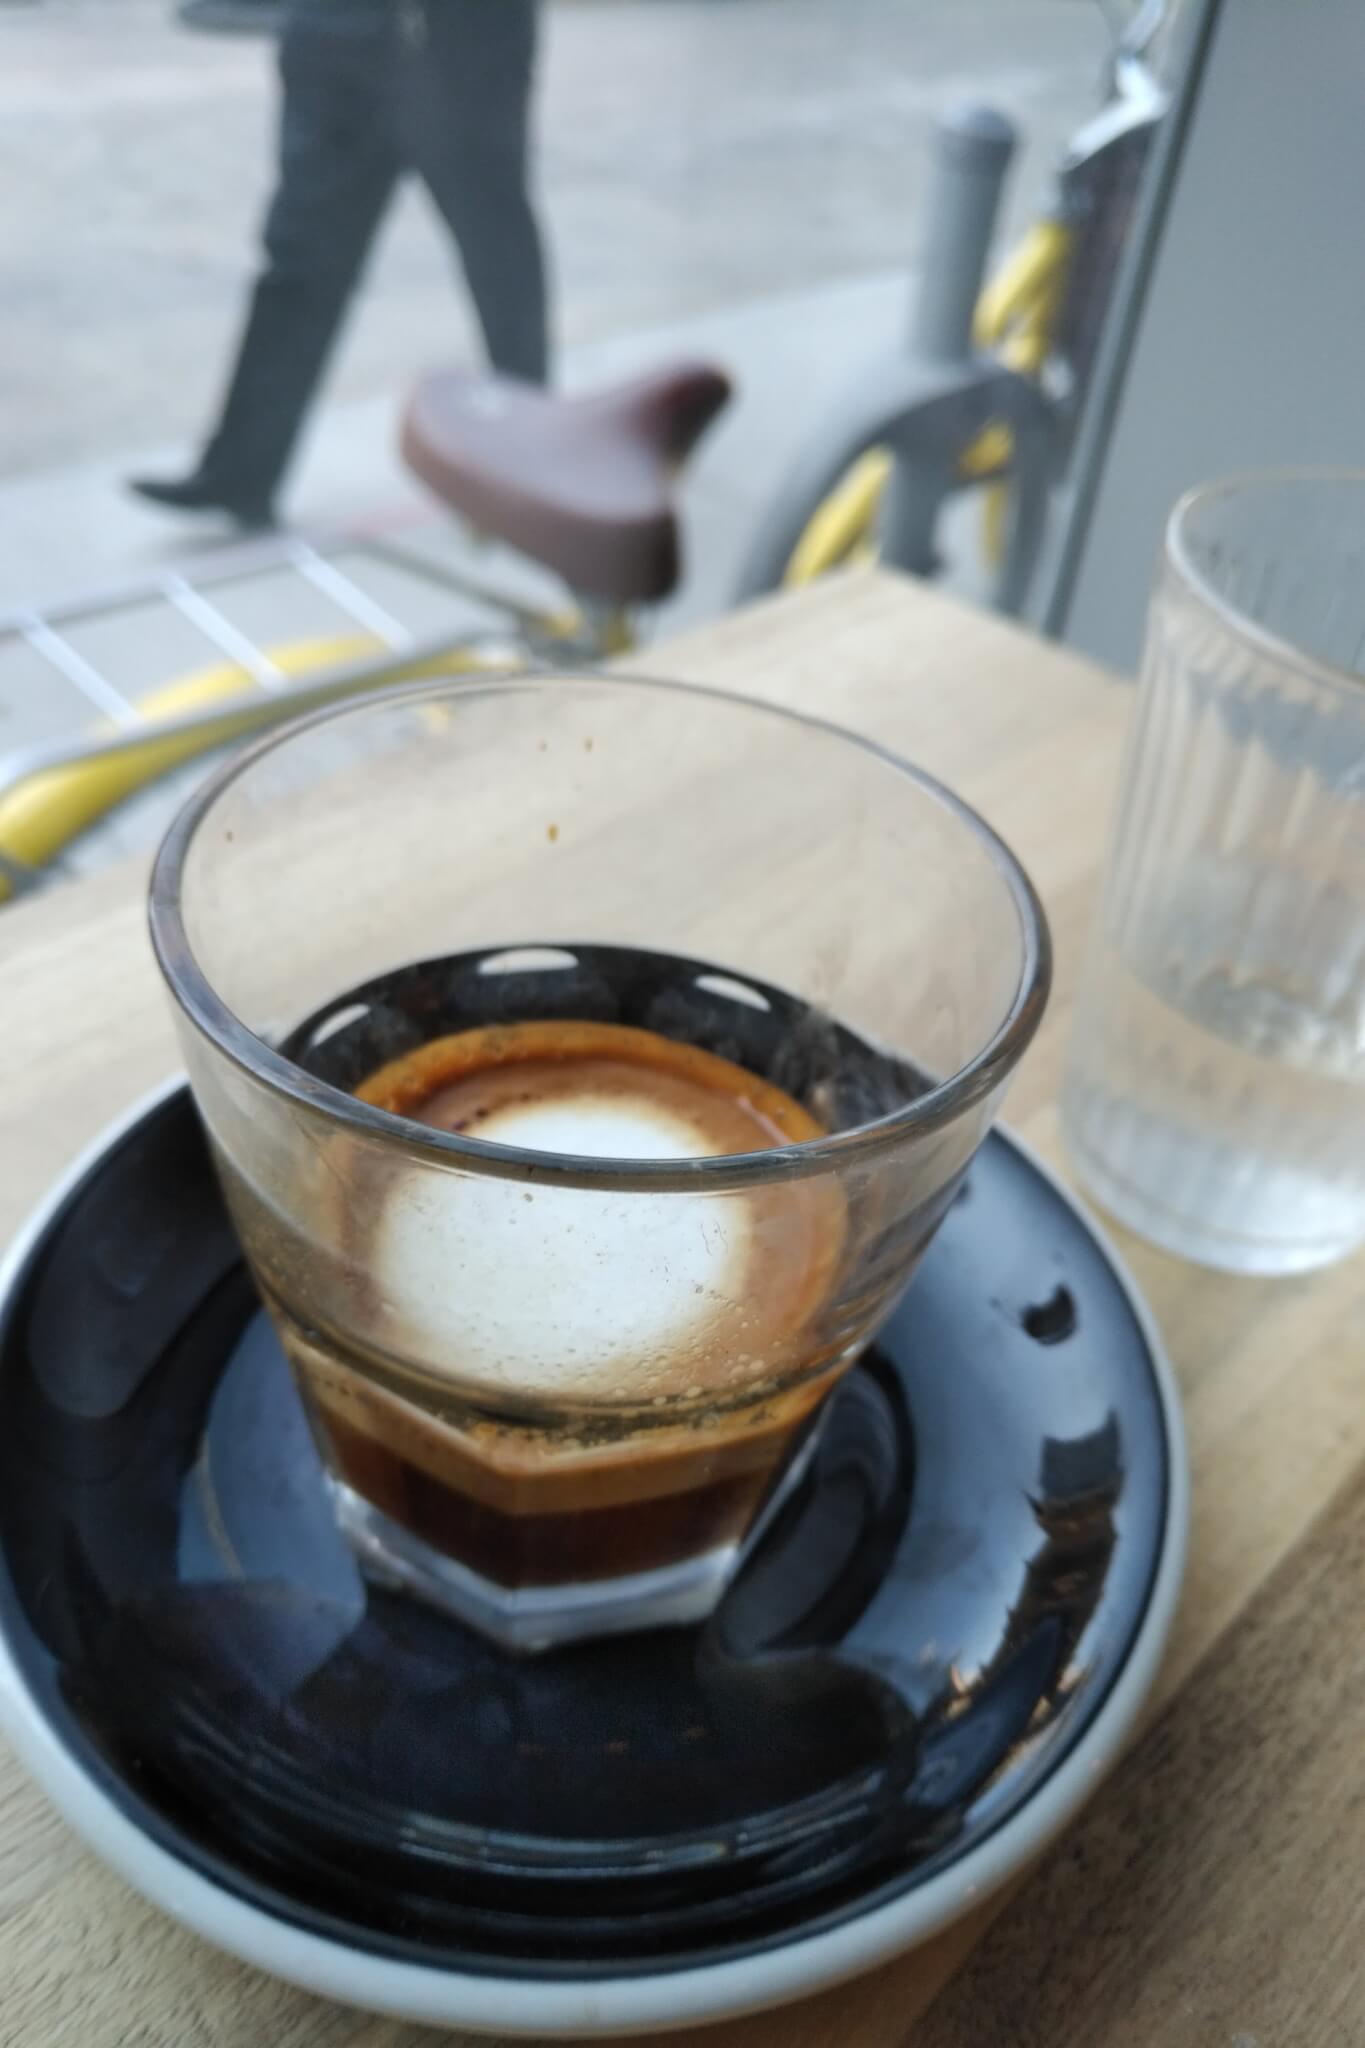 macchiato in a small glass. A bike leans against a post outside the window.